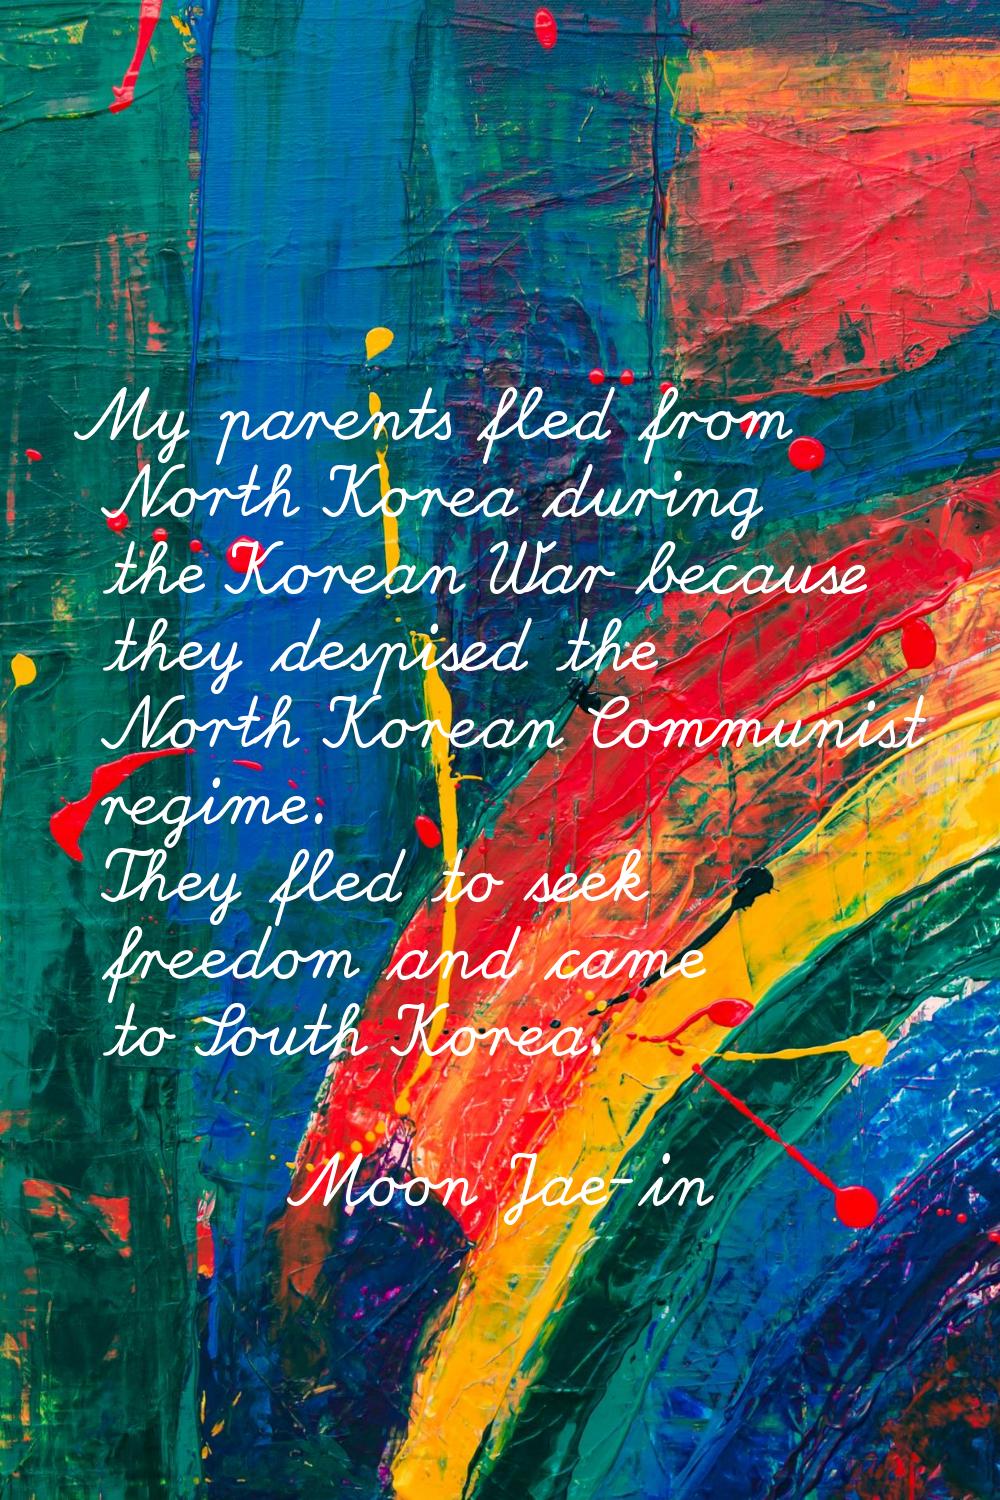 My parents fled from North Korea during the Korean War because they despised the North Korean Commu